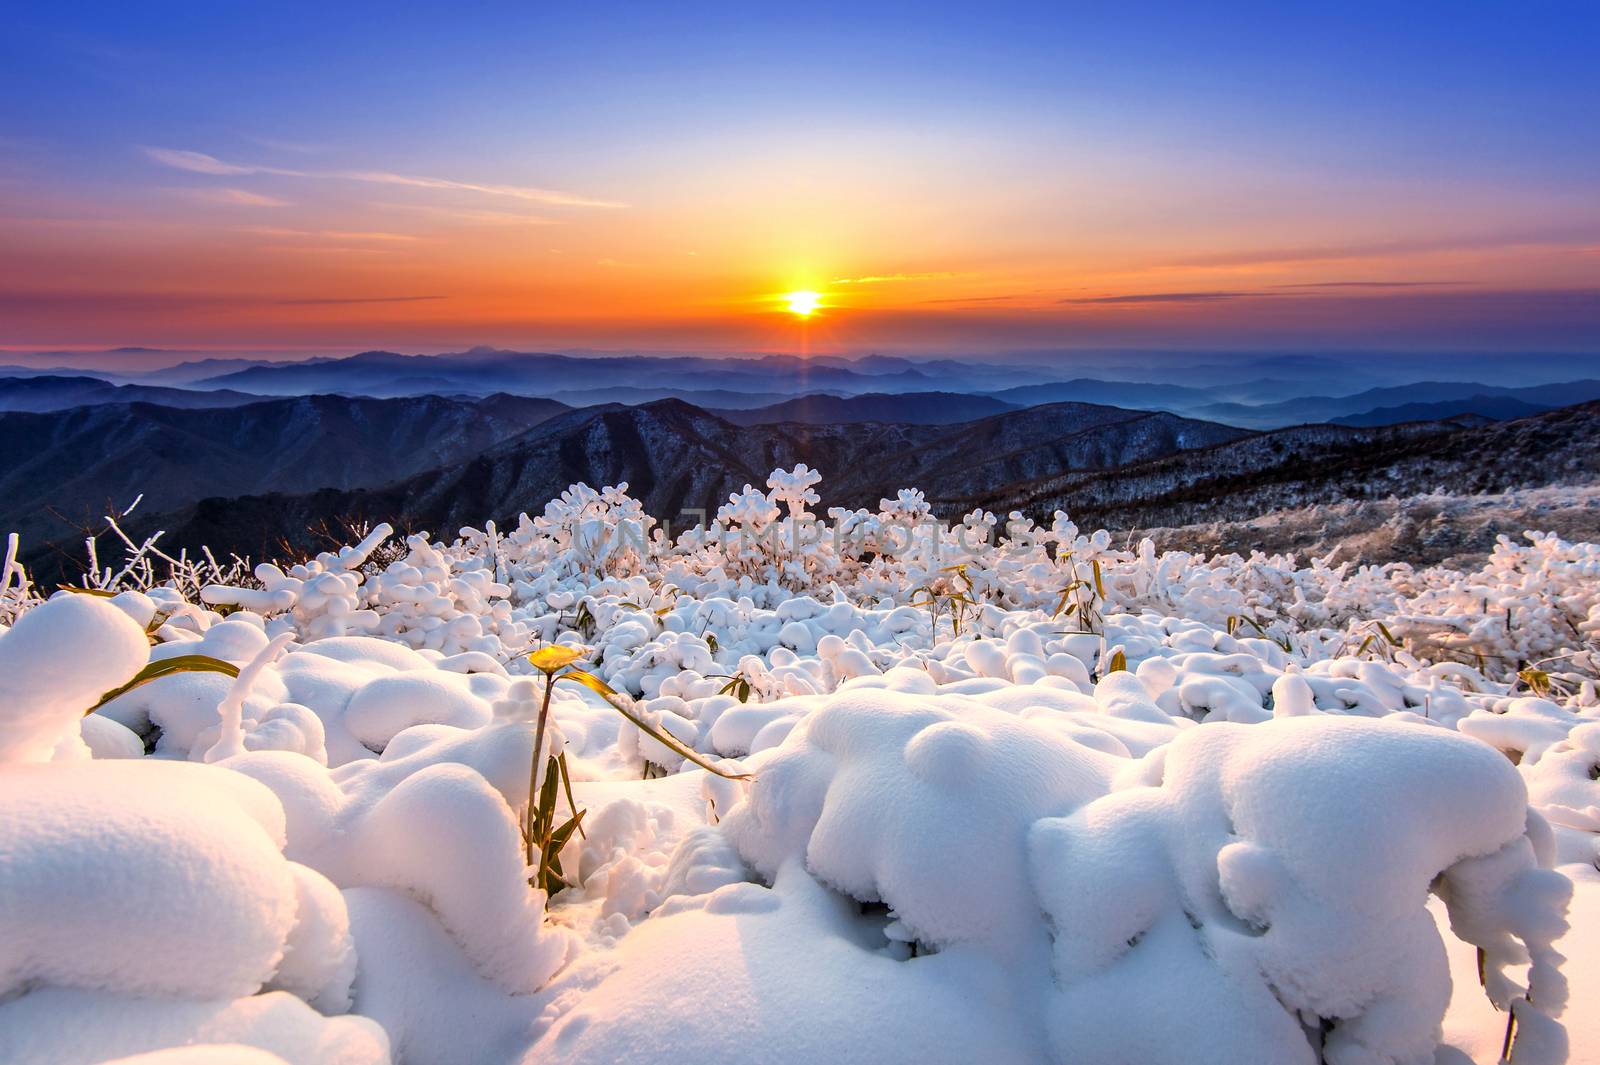 Beautiful sunrise on Deogyusan mountains covered with snow in wi by gutarphotoghaphy